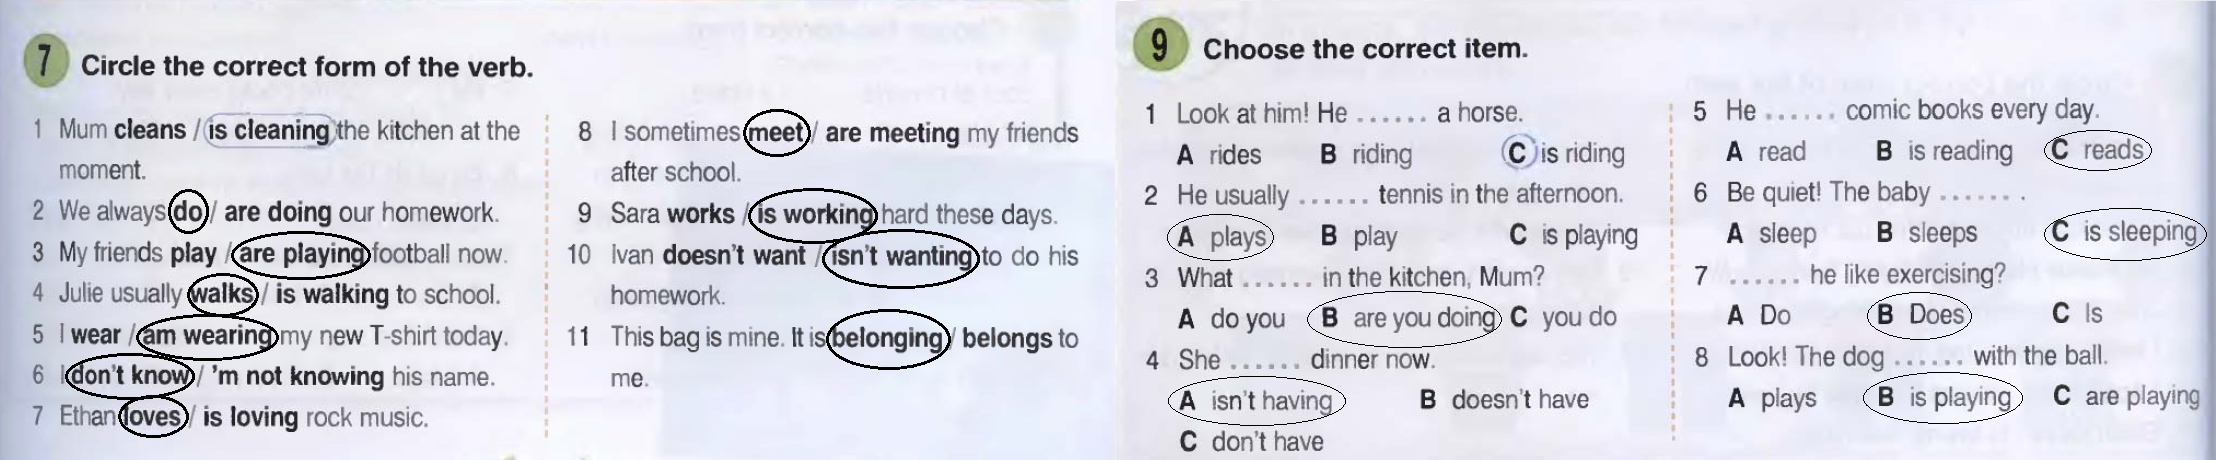 They the words every day. Choose the correct item ответы. Circle the correct answer 4 класс. Grammar 5 класс 5.choose the correct item. Choose the correct verb.